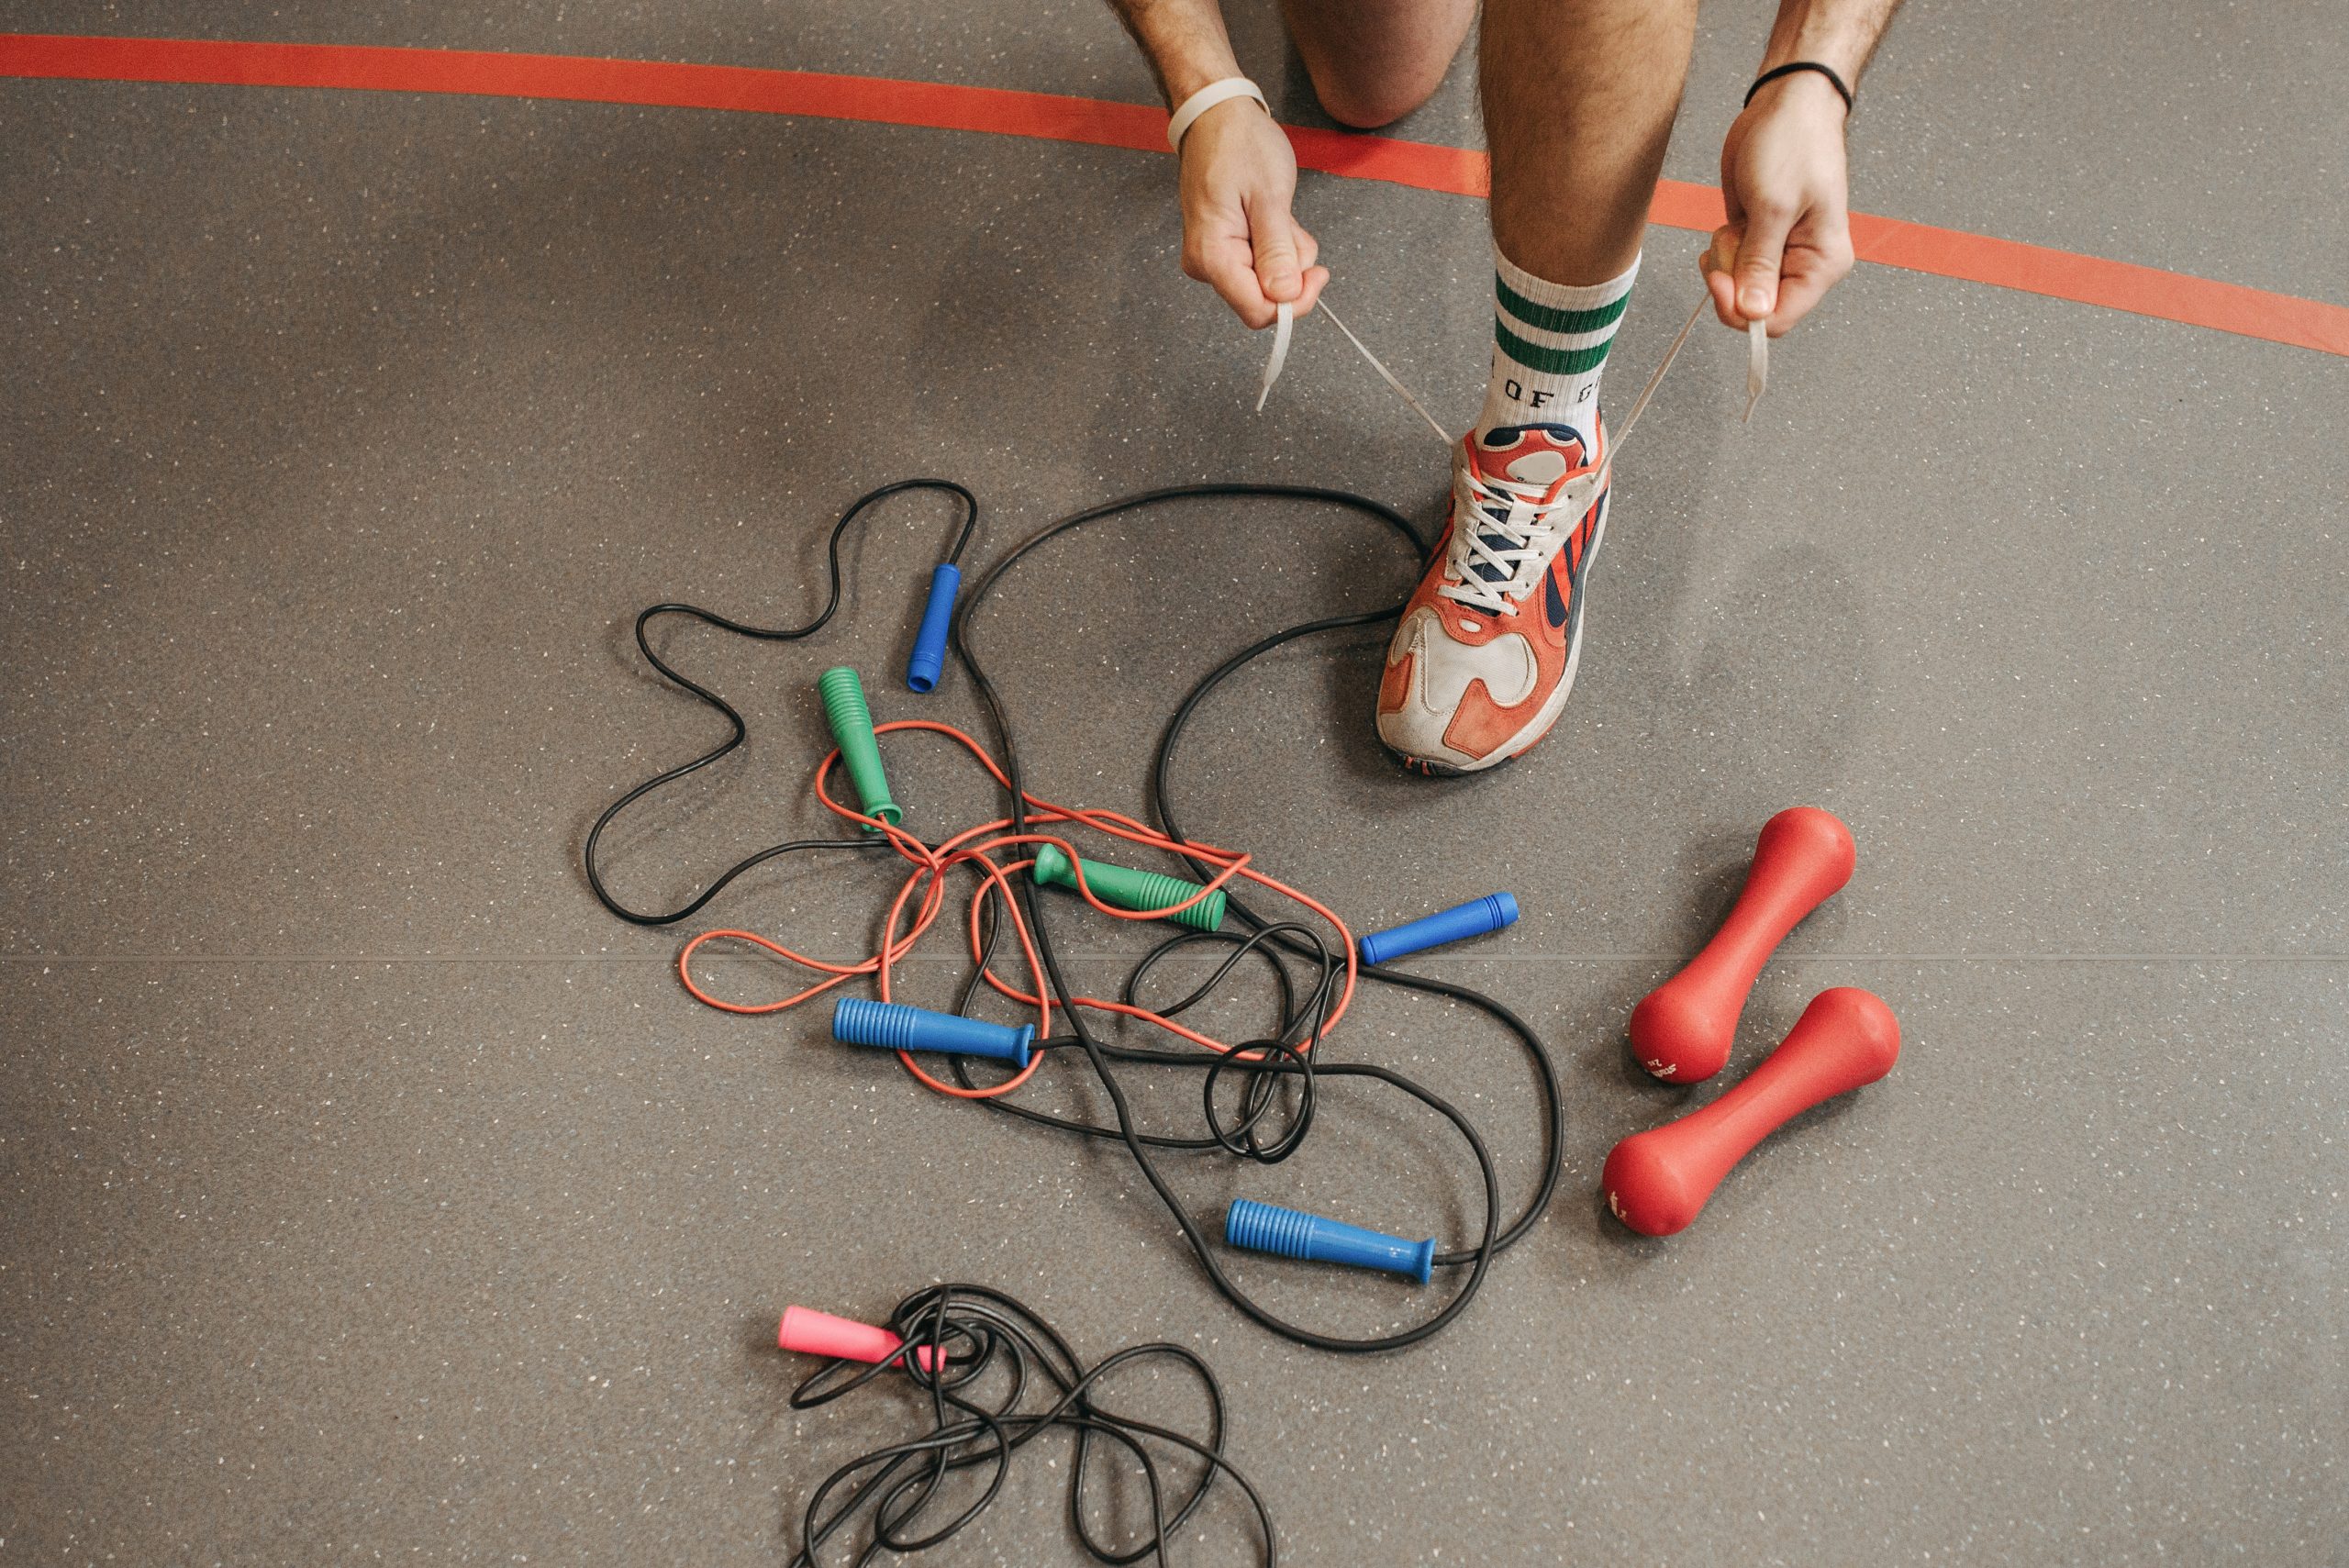 A Man Tying Shoe Lace Near Jump Ropes on the Floor